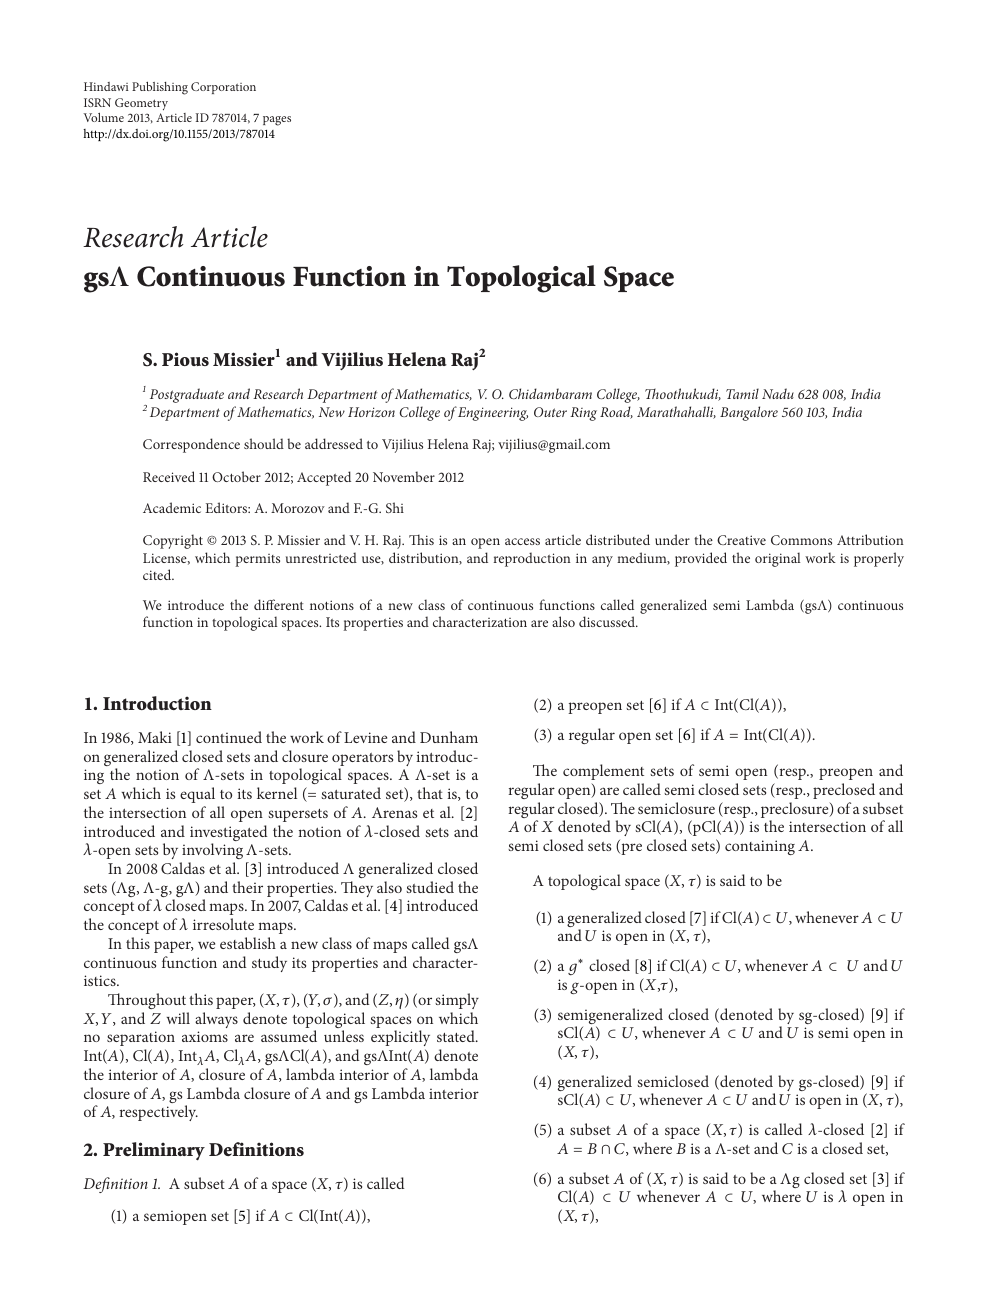 Gs Continuous Function In Topological Space Topic Of Research Paper In Mathematics Download Scholarly Article Pdf And Read For Free On Cyberleninka Open Science Hub